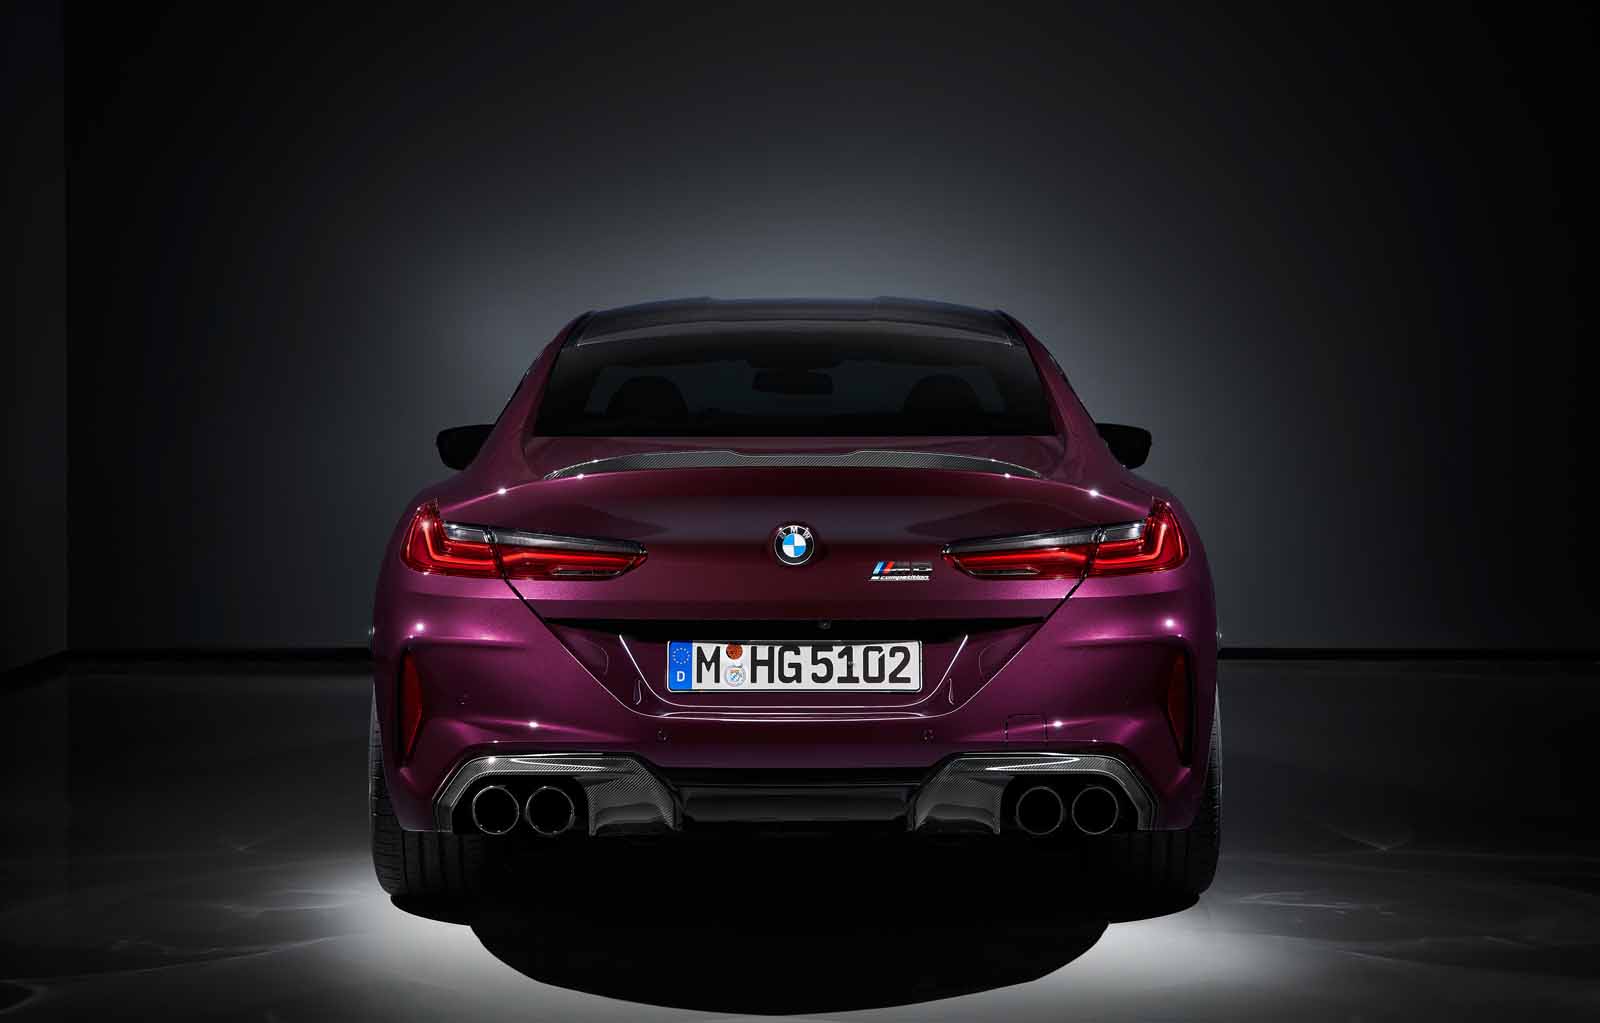 Bmw M8 Gran Coupe Has First Public Outing At La Show Autocar